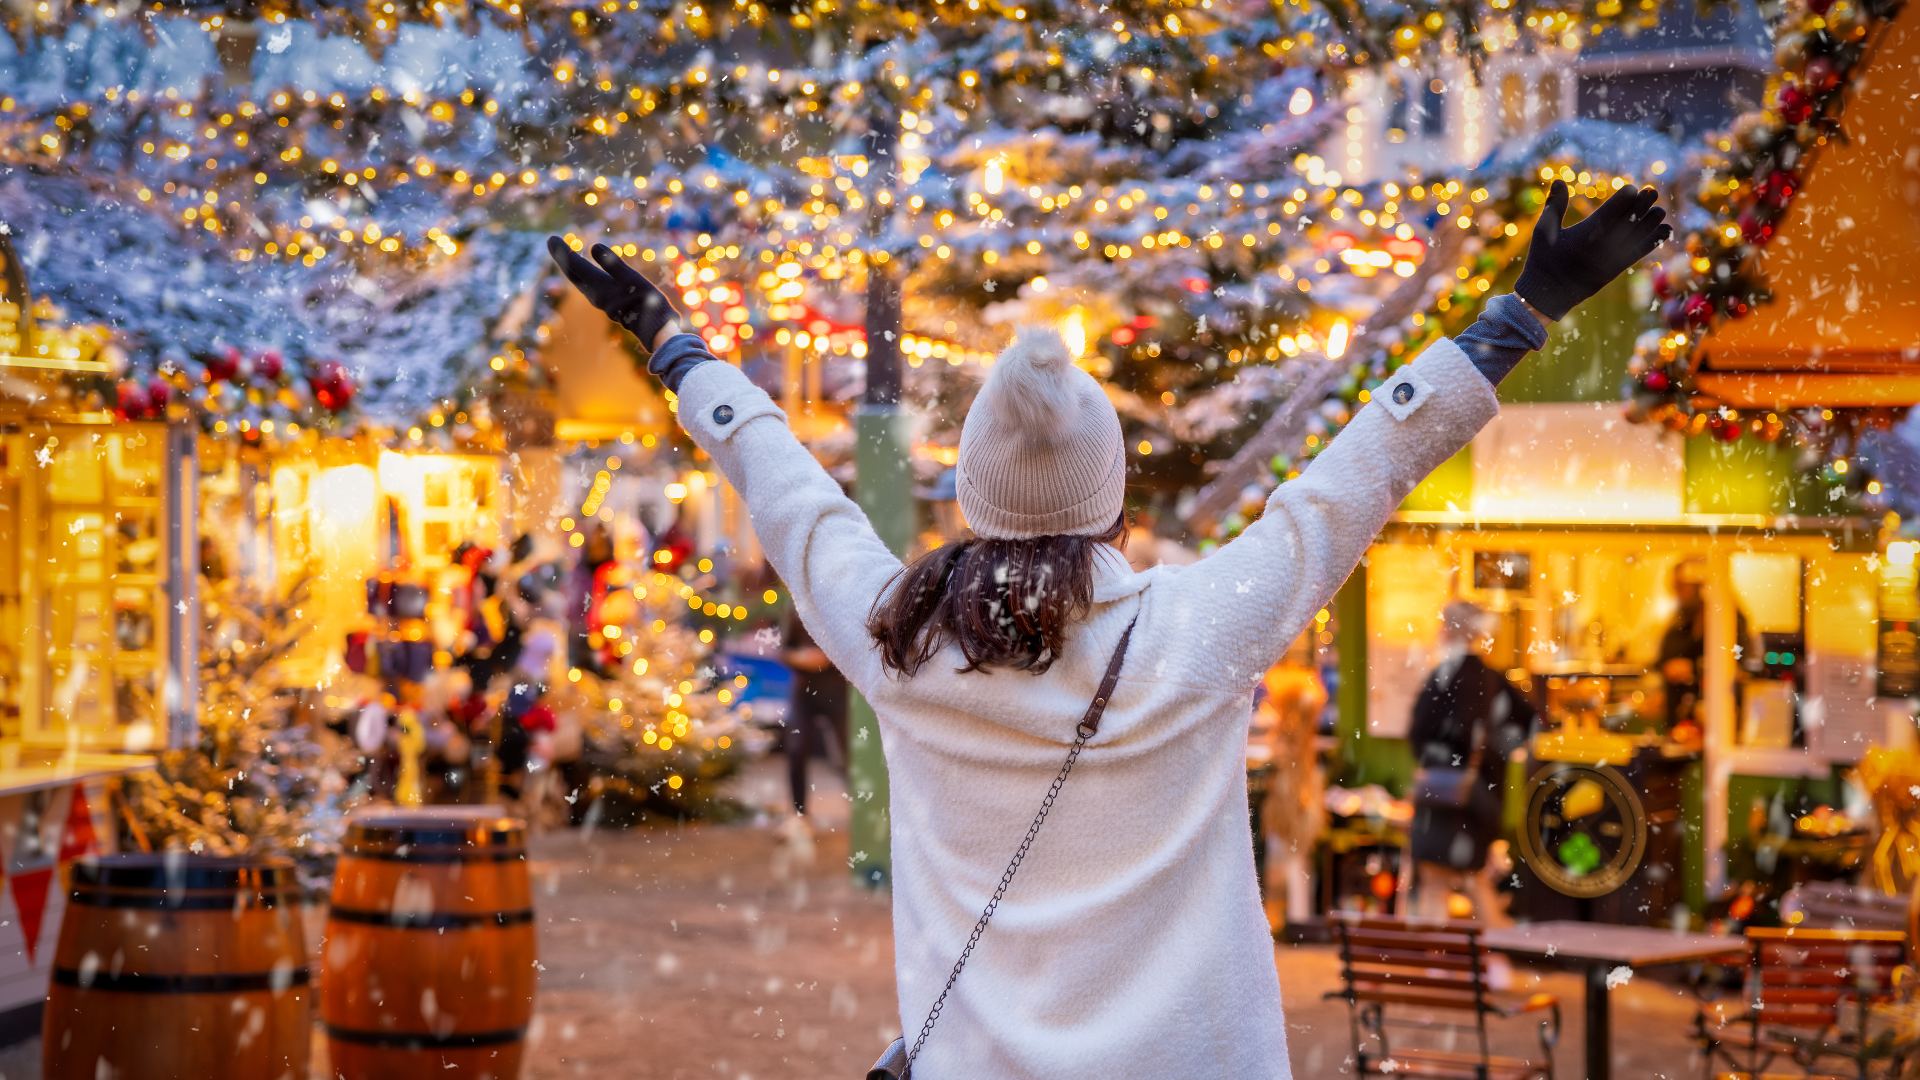 ad551481066 Excited visitor at the Copenhagen Christmas market